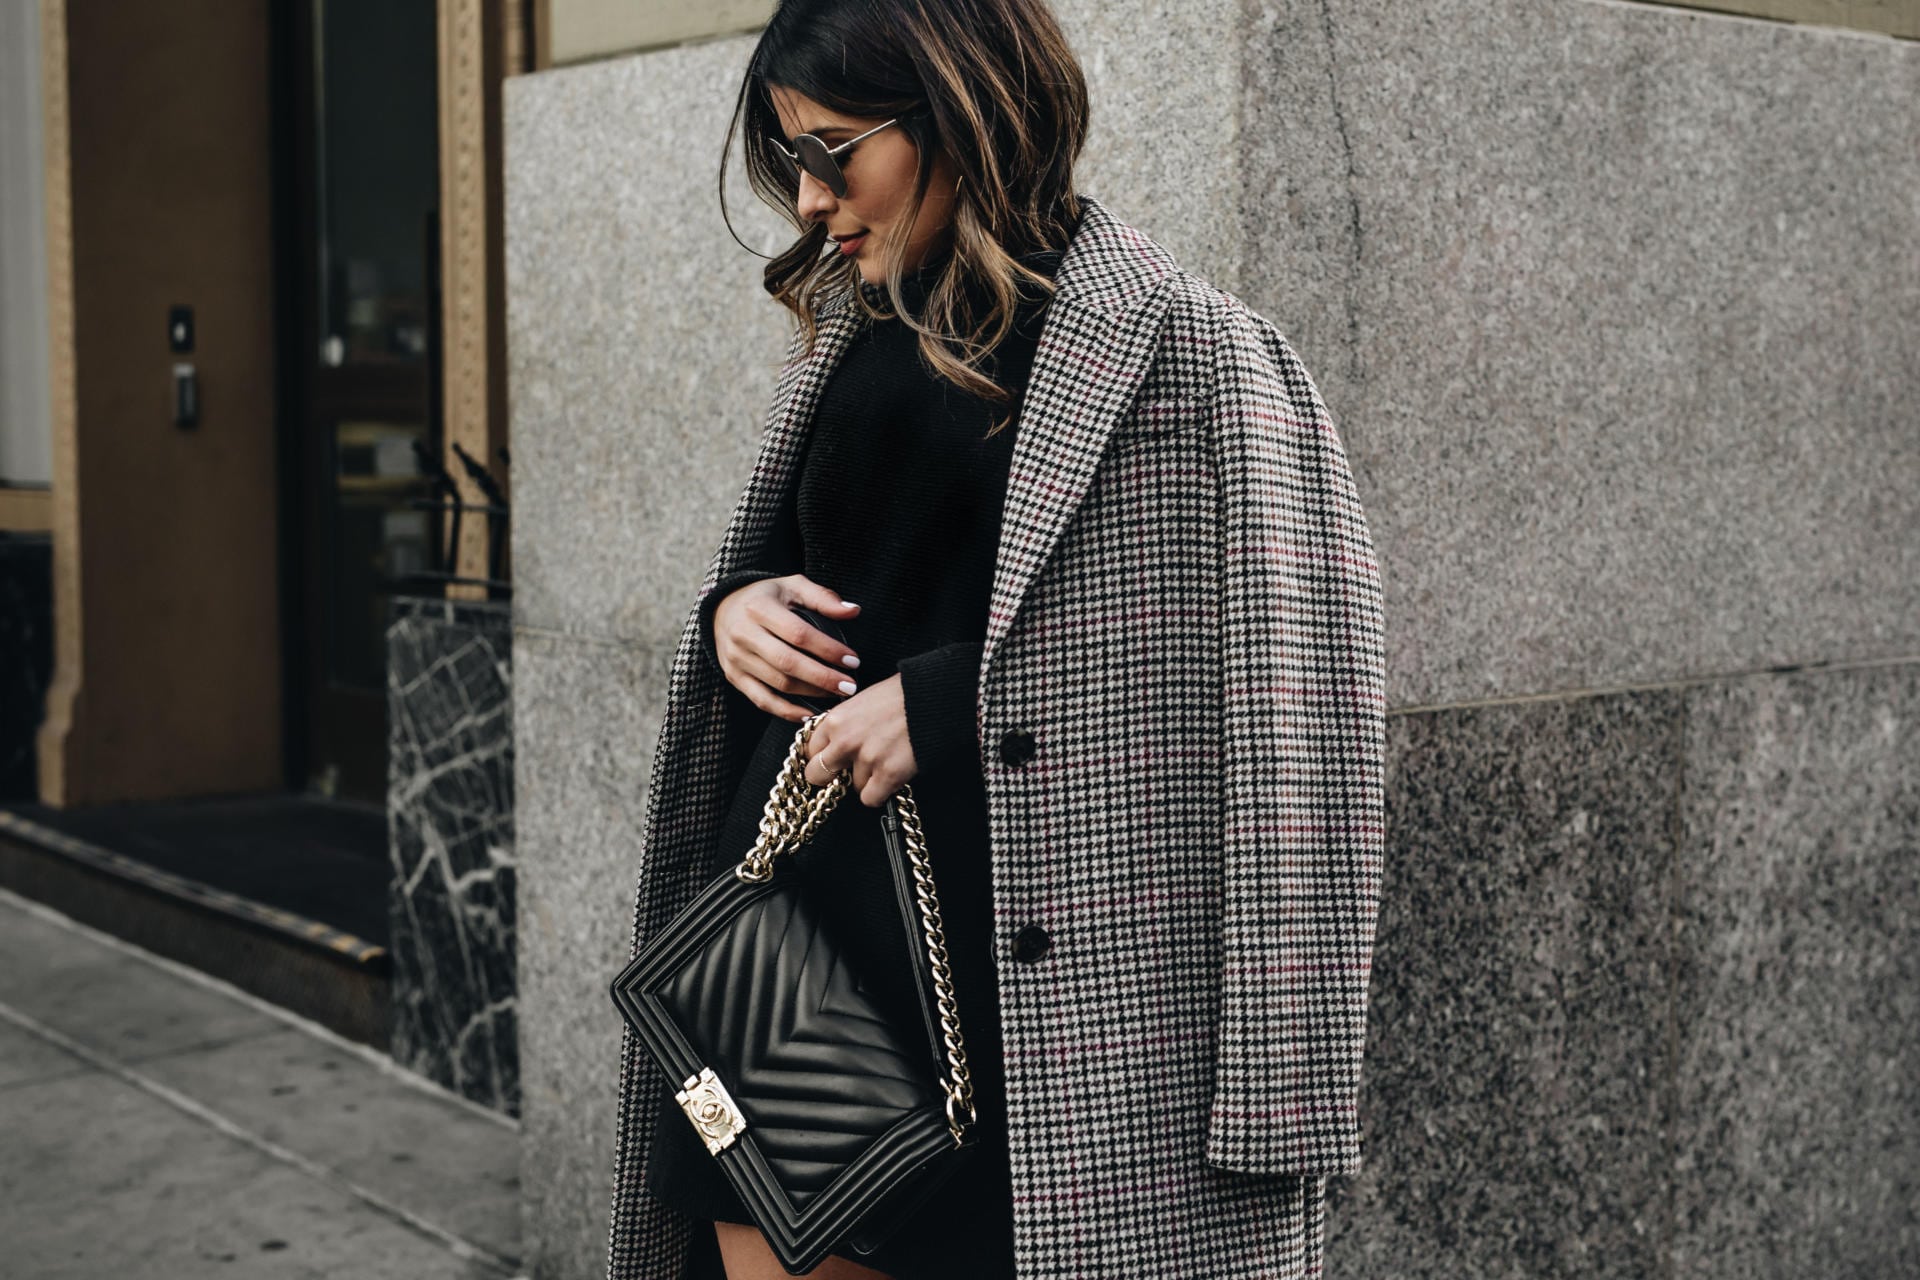 Tips for Looking Chic in a Casual Outfit by Pam Hetlinger | TheGirlFromPanama.com | plaid blazers, la fashion blogger, chic casual outfit